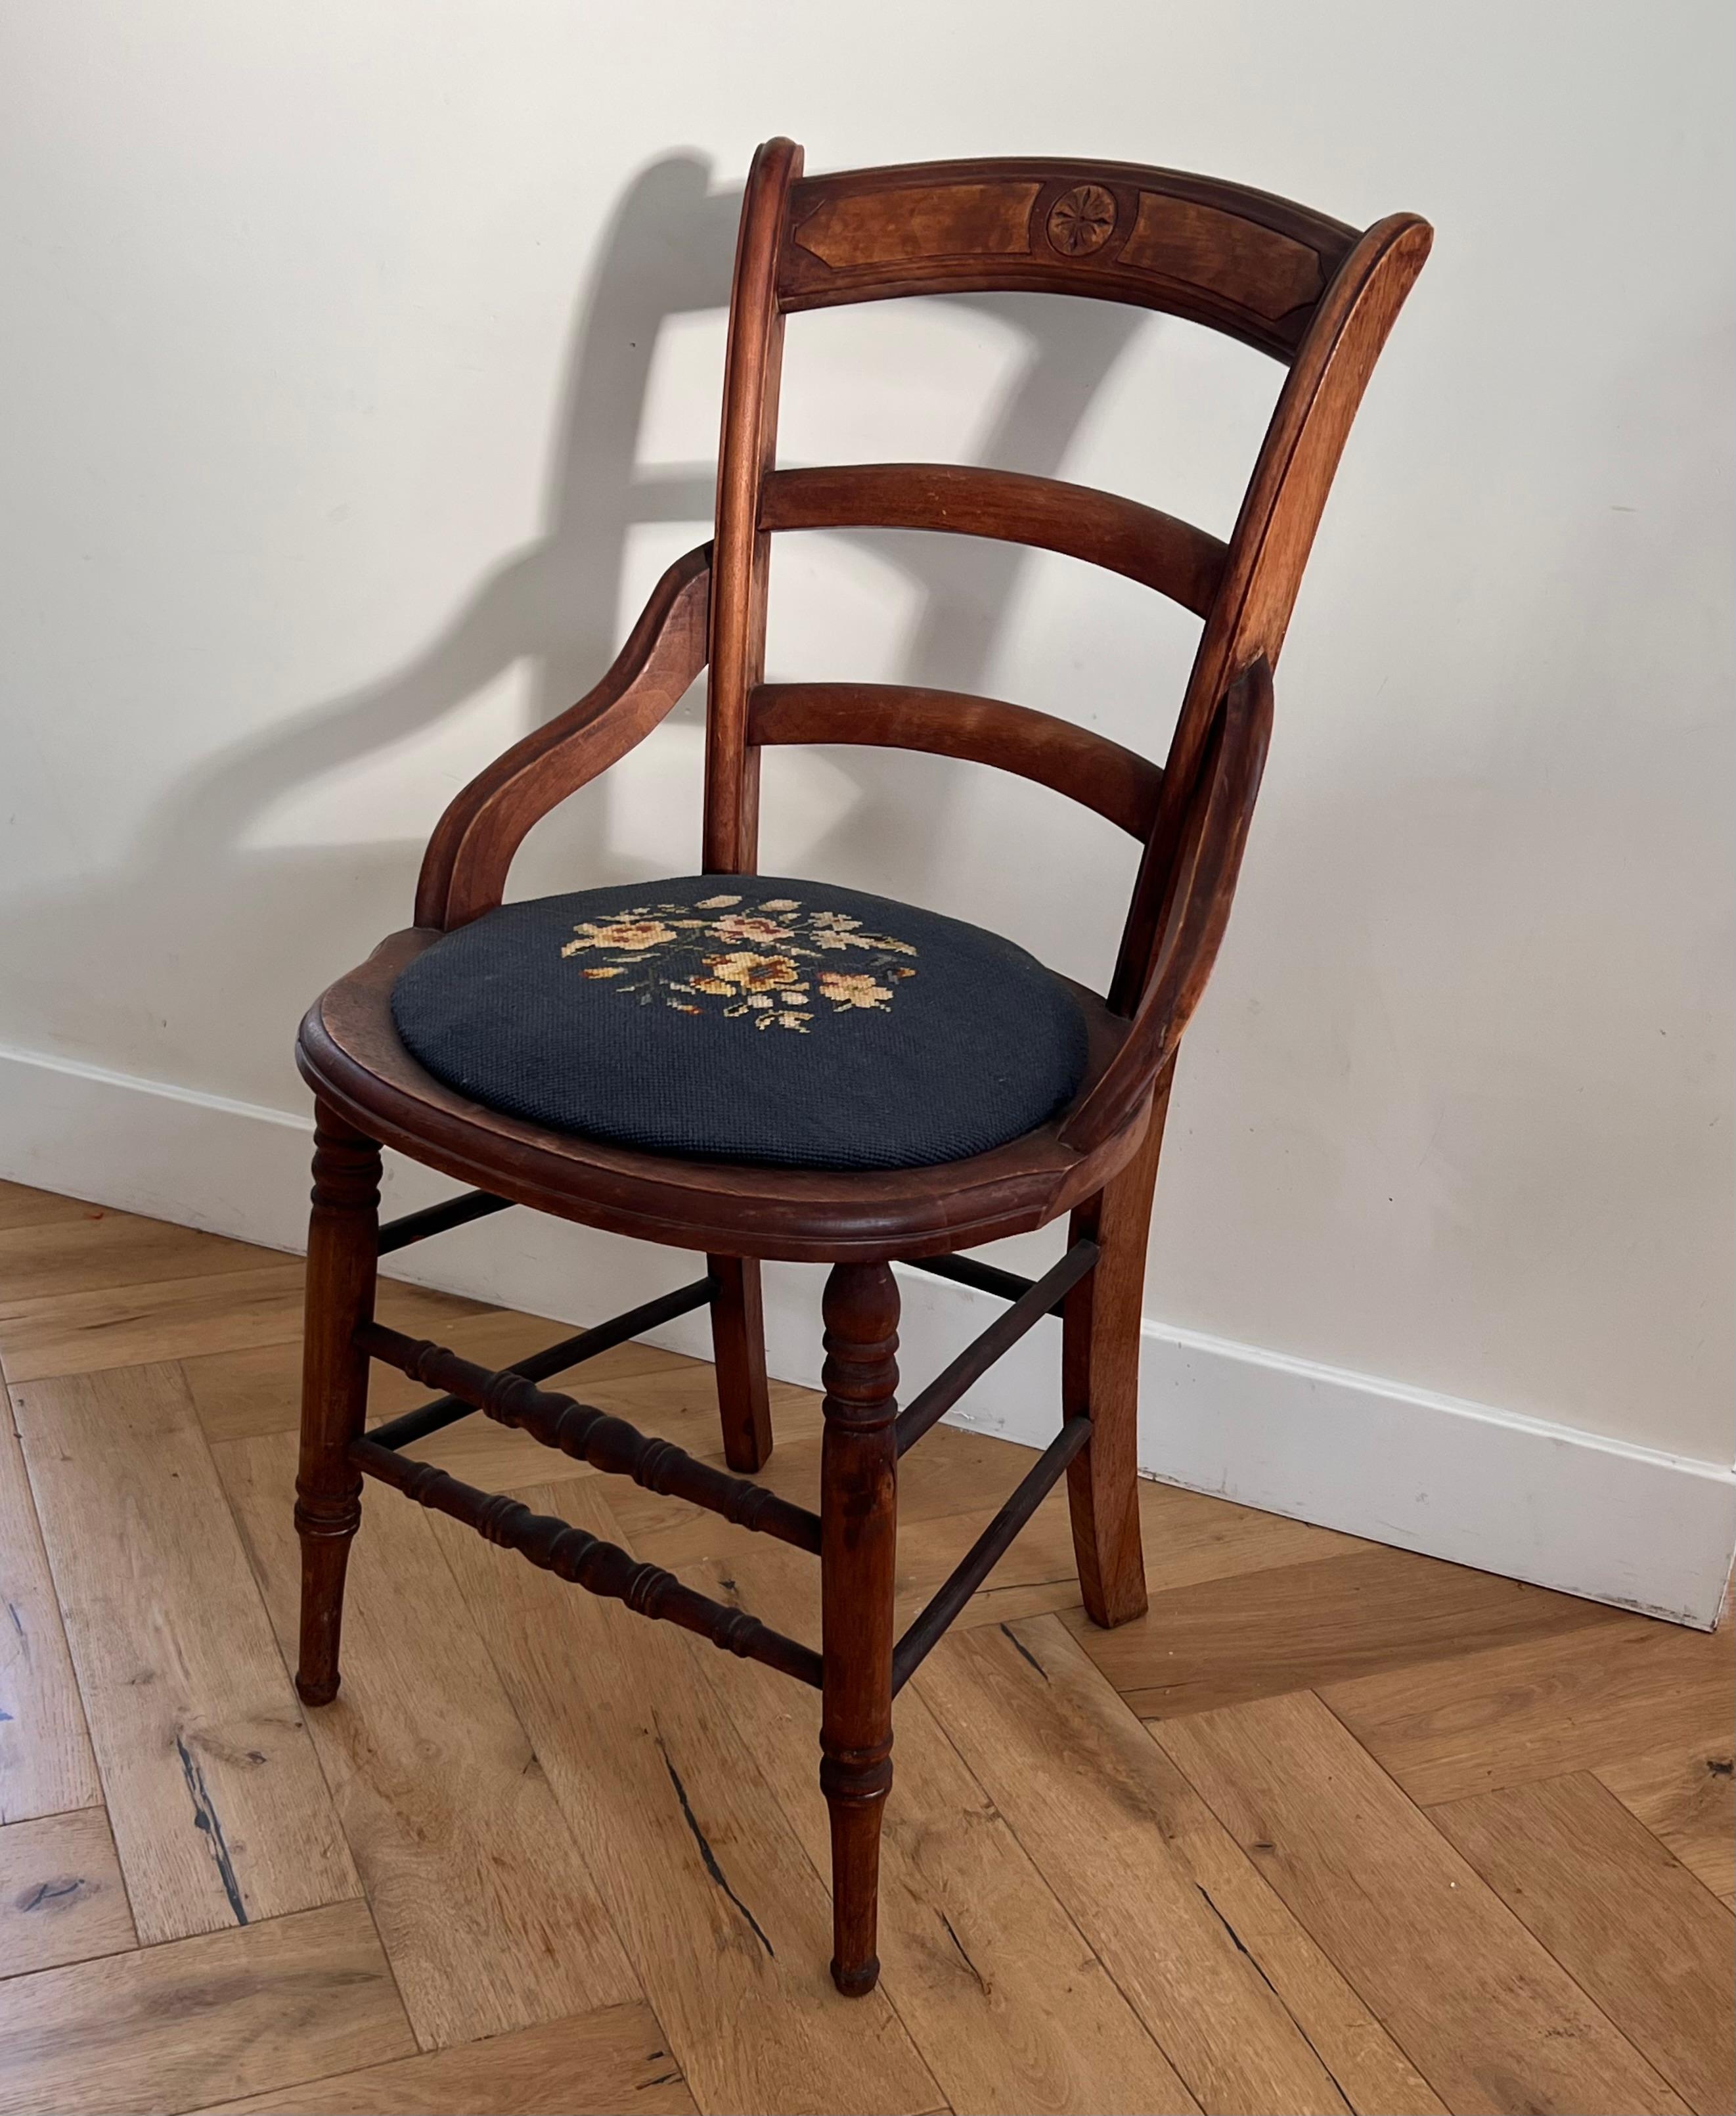 Antique Wooden Chair with Embroidered Needlepoint Seat, Early 20th Century For Sale 3